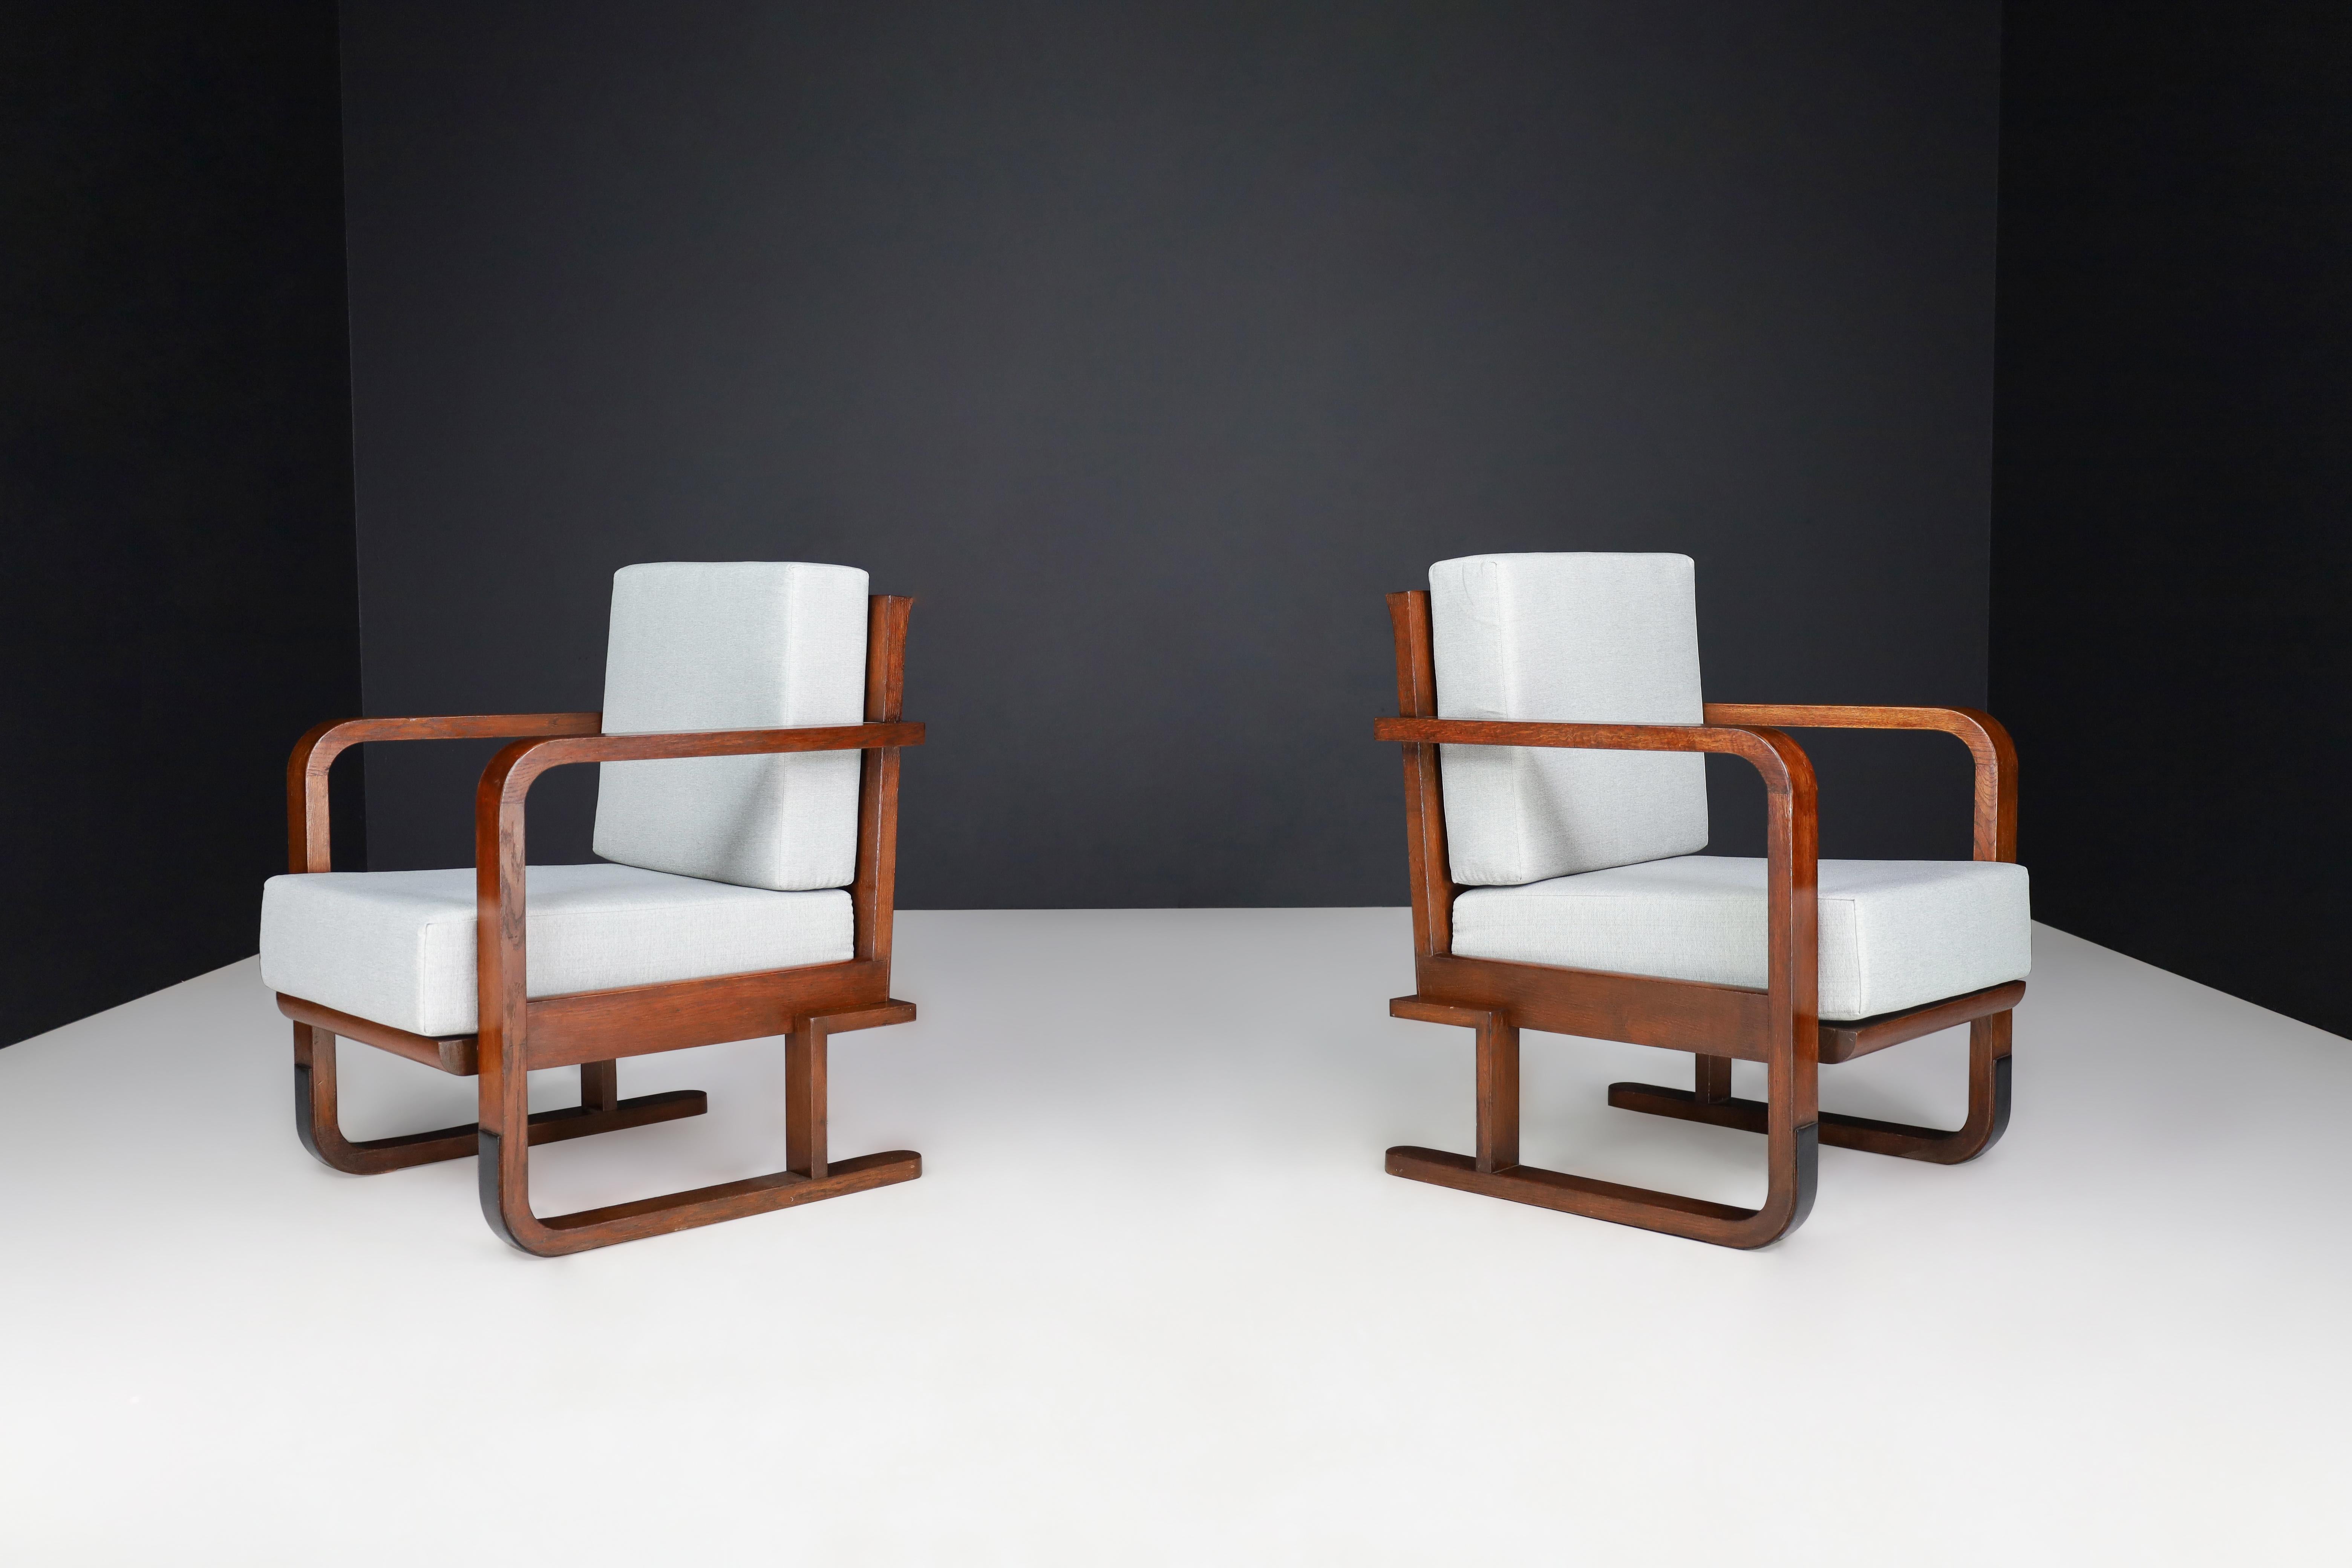 Art Deco Armchairs In Oak Bentwood and New Upholstery, Austria 1930

These are two Art Deco armchairs or lounge chairs that were made in Austria in the 1930s. They are made from Oak Bentwood and have been upholstered with new fabric. These chairs